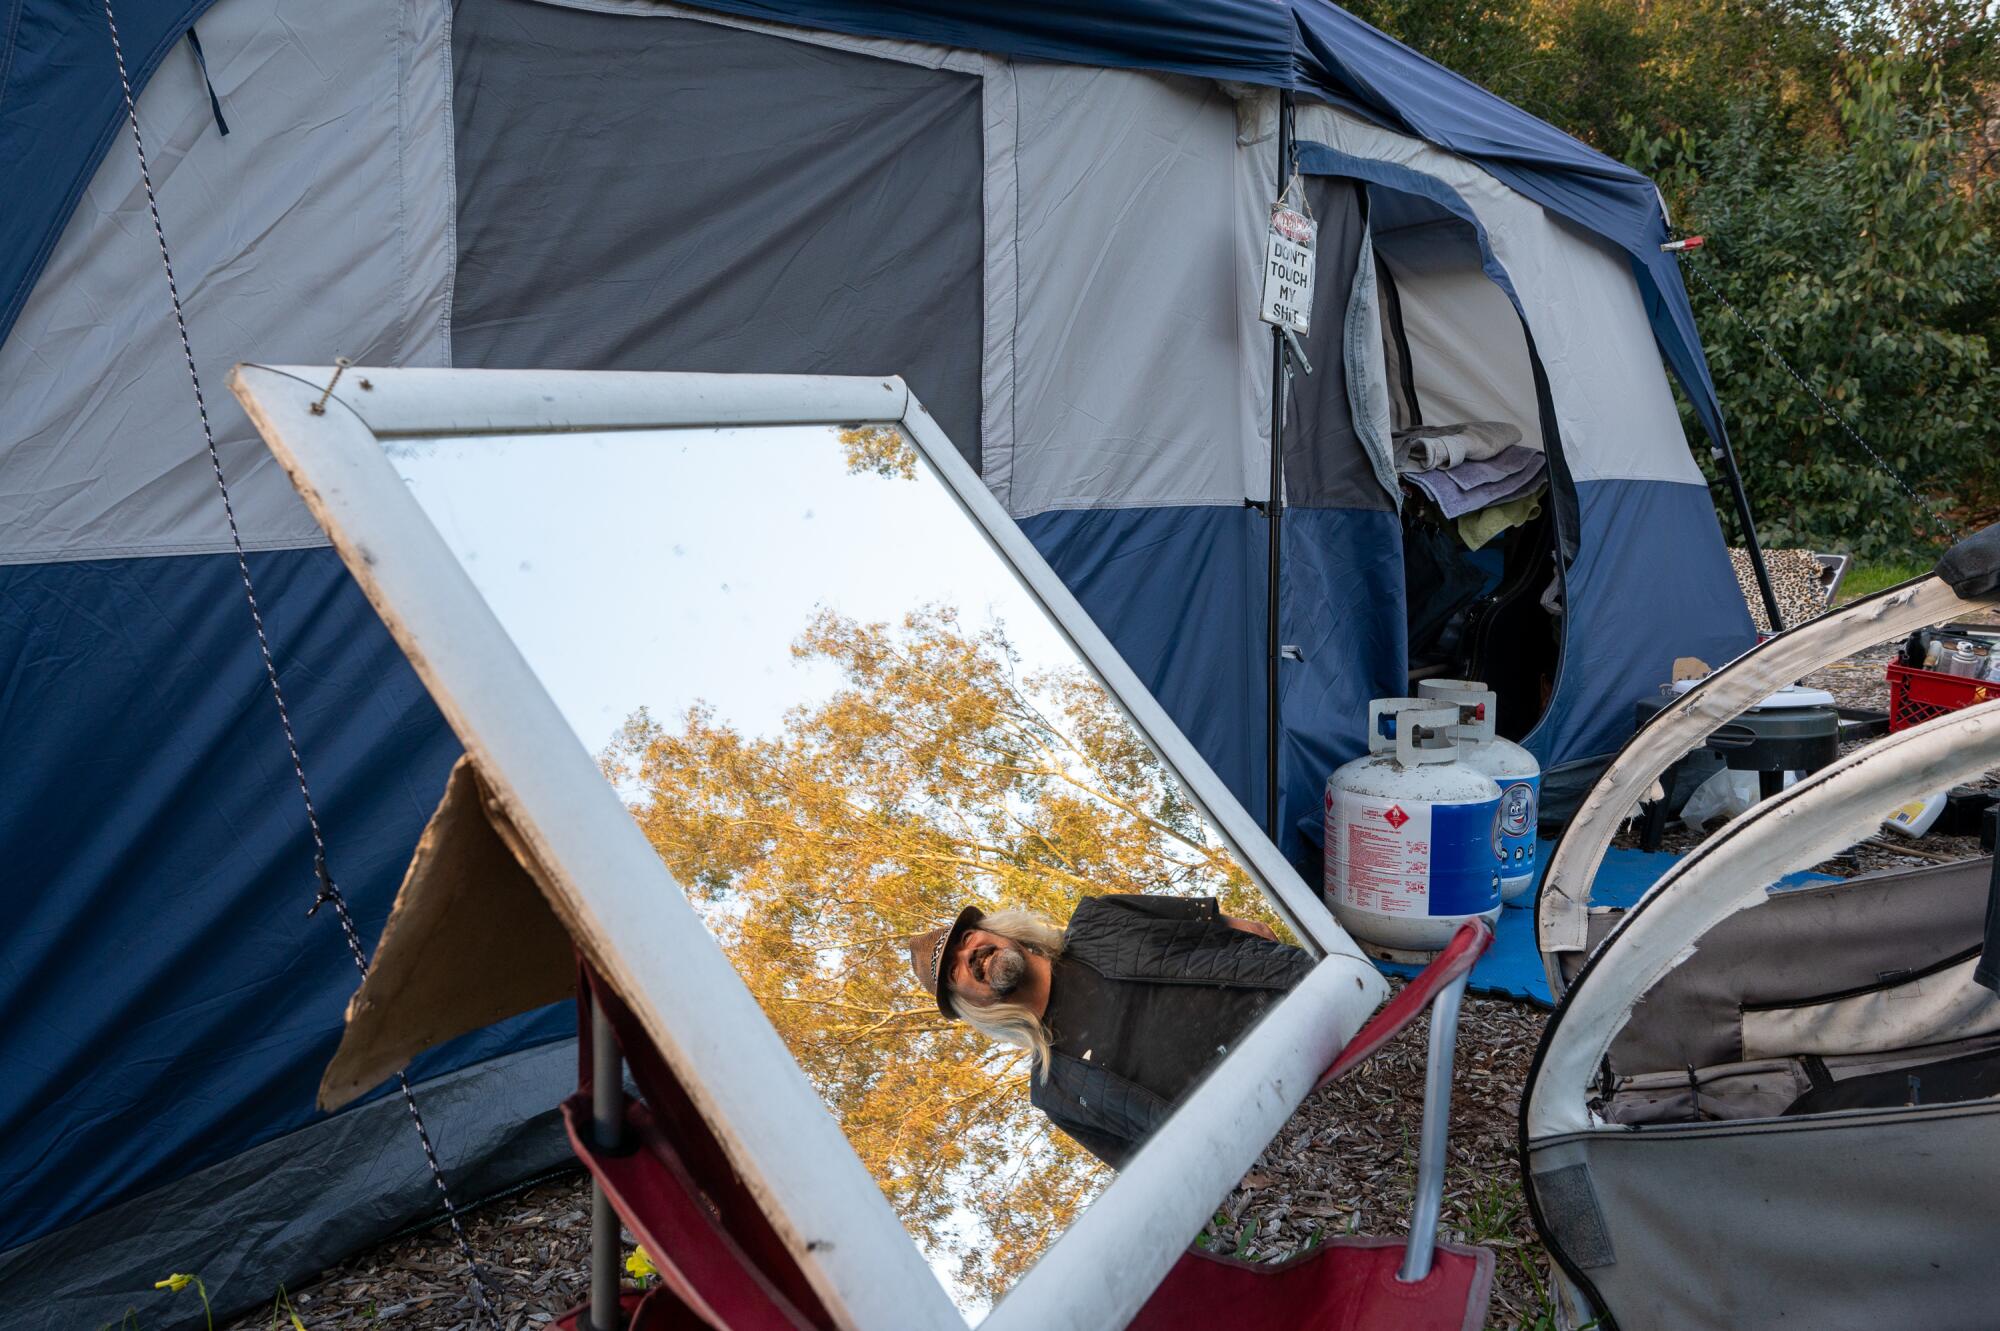 A man's image is reflected in a mirror at a homeless encampment.